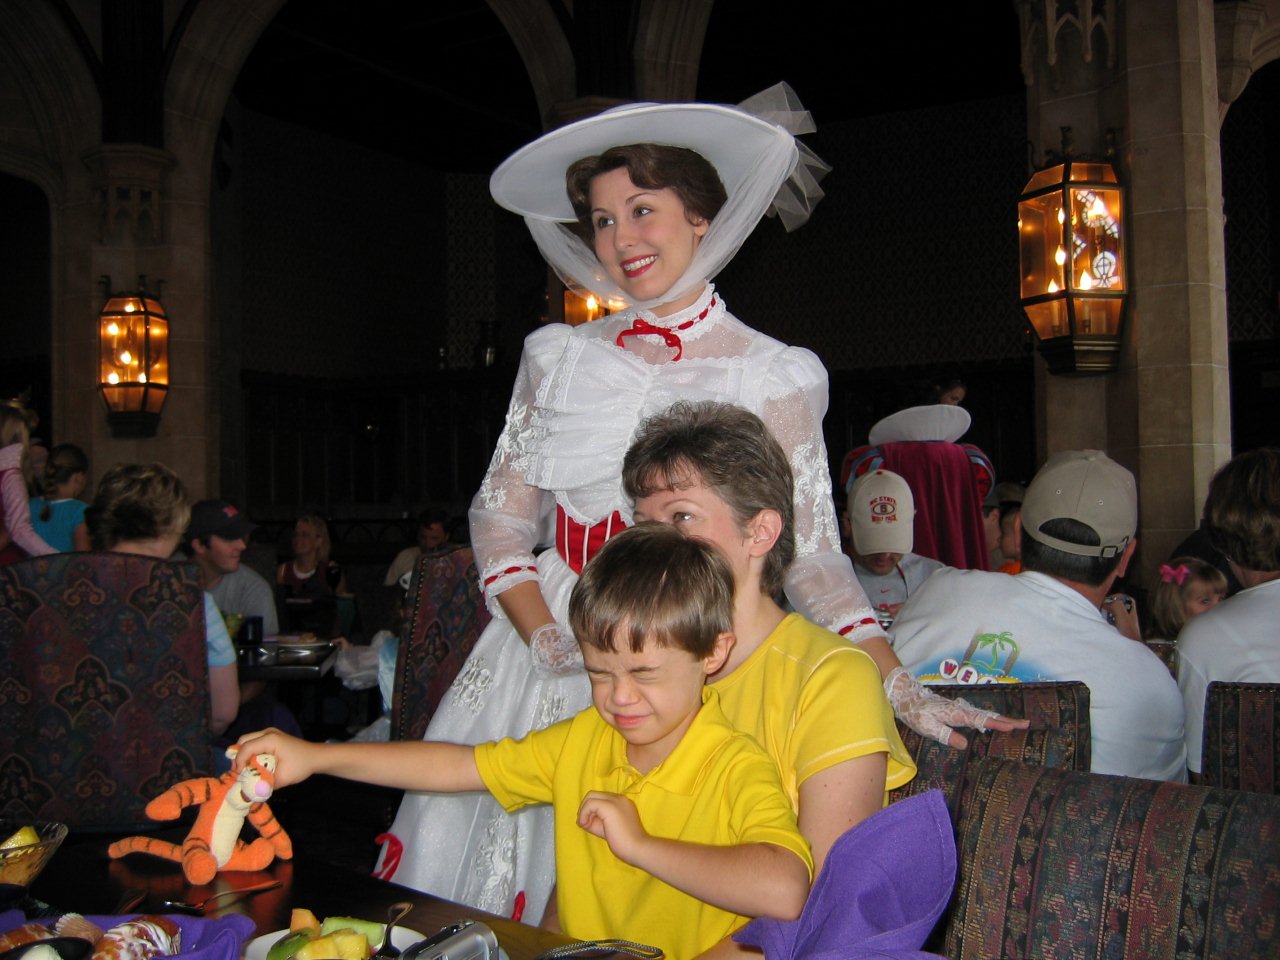 Walt Disney World is a magical place for guests with special needs | PassPorter.com